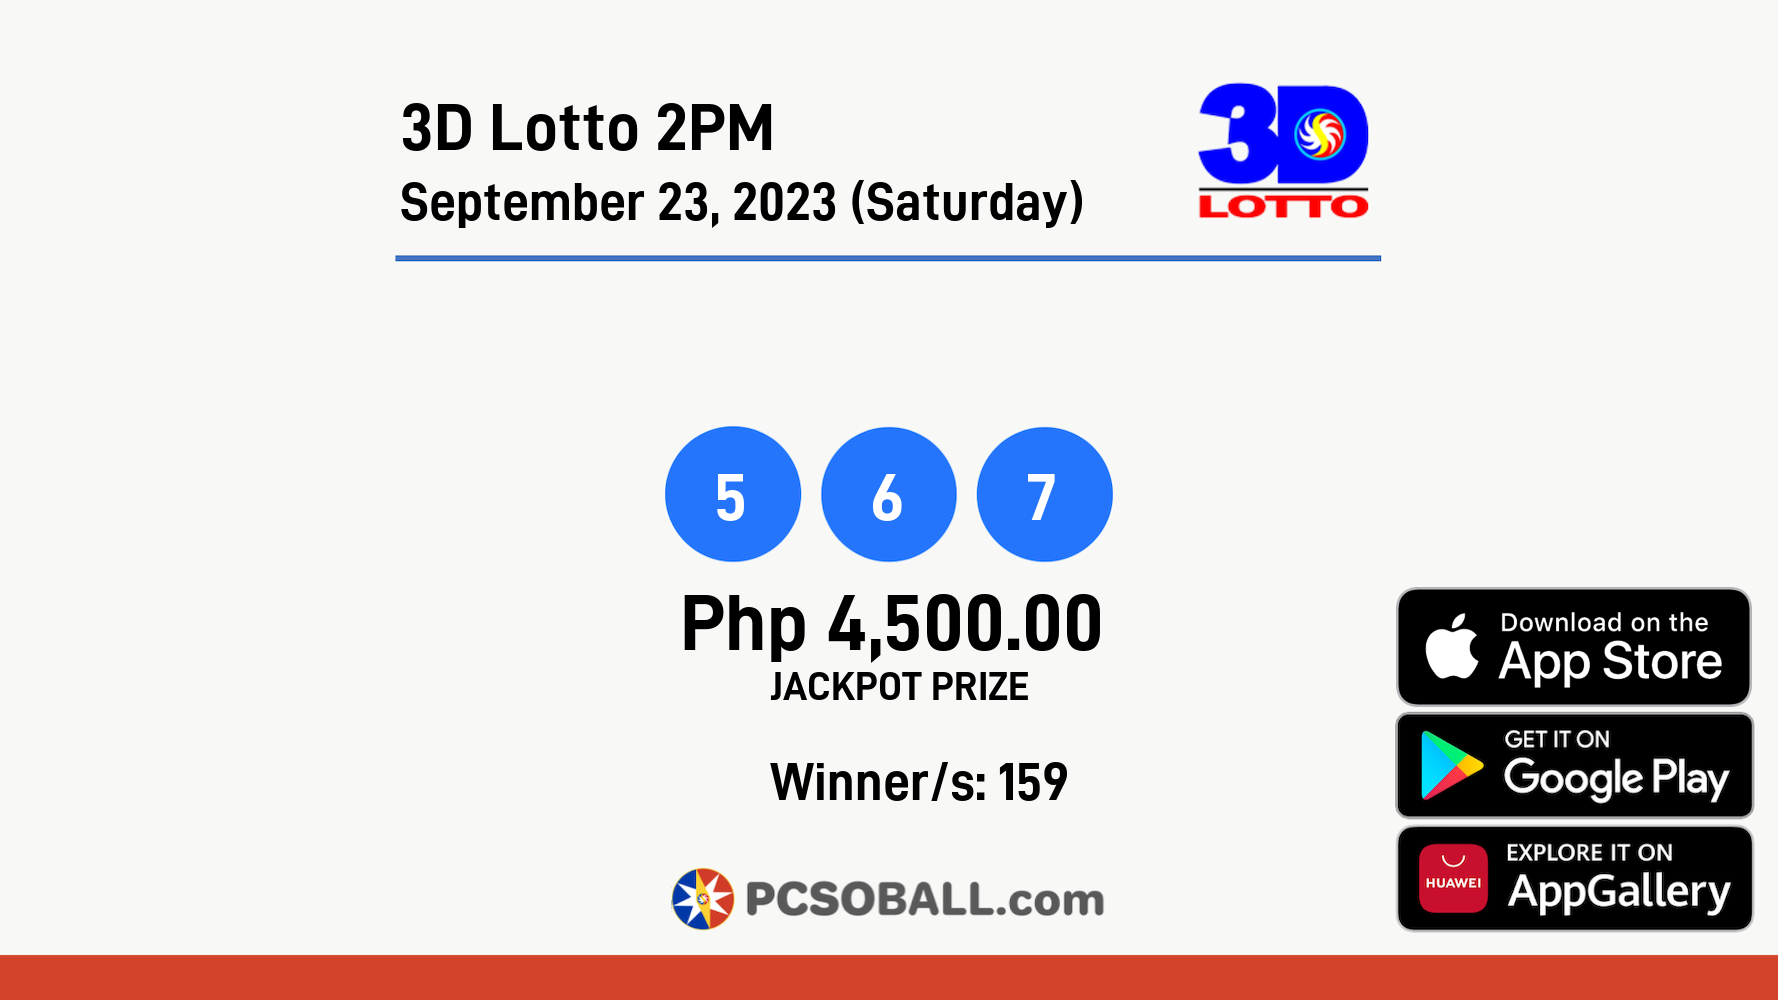 3D Lotto 2PM September 23, 2023 (Saturday) Result